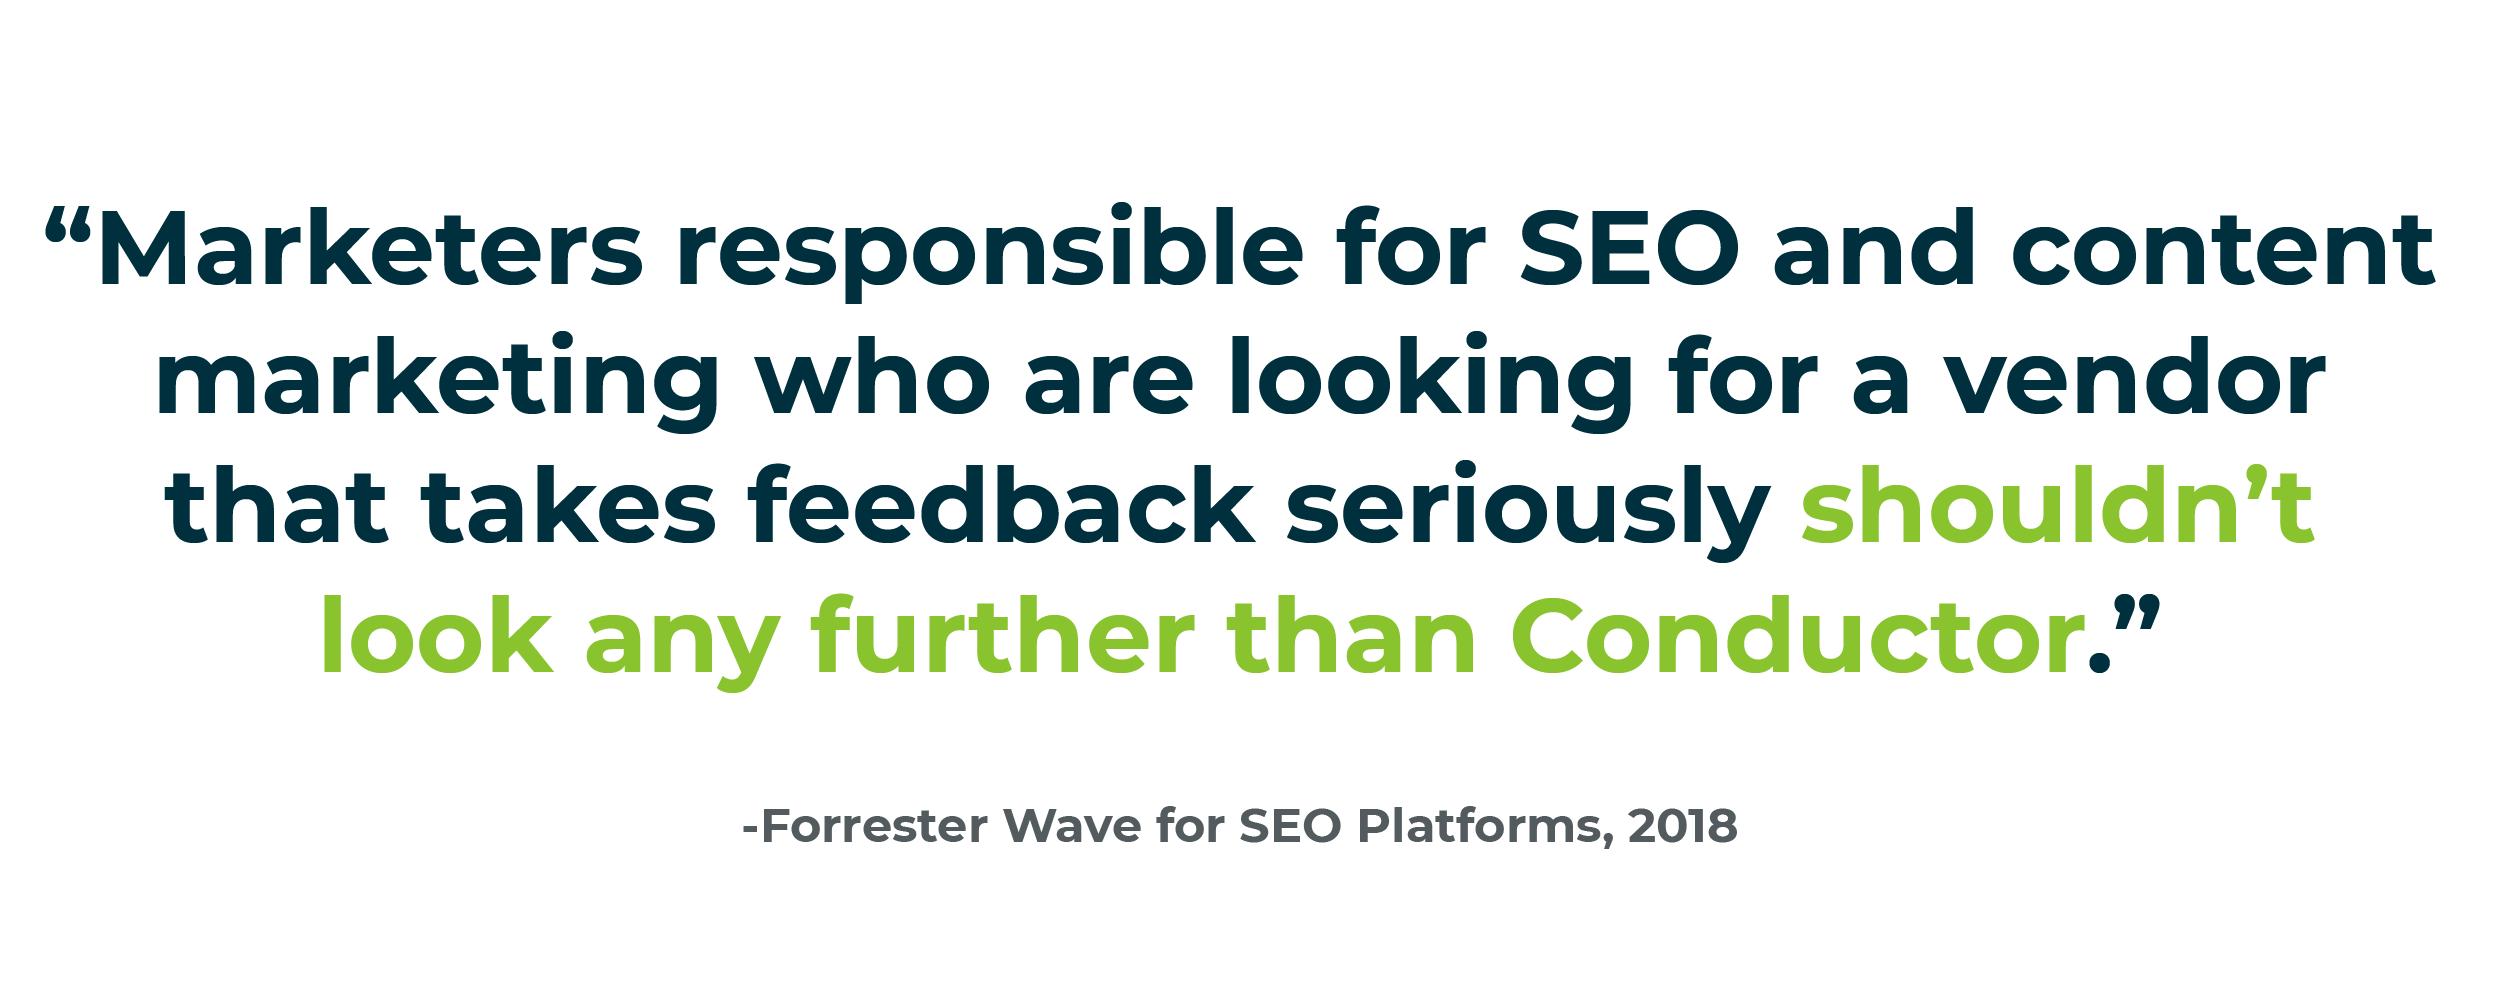 Marketers responsible for SEO and content marketing who are looking for a vendor that takes feedback seriously shouldn’t look any further than Conductor. -Forrester Wave, SEO Platform